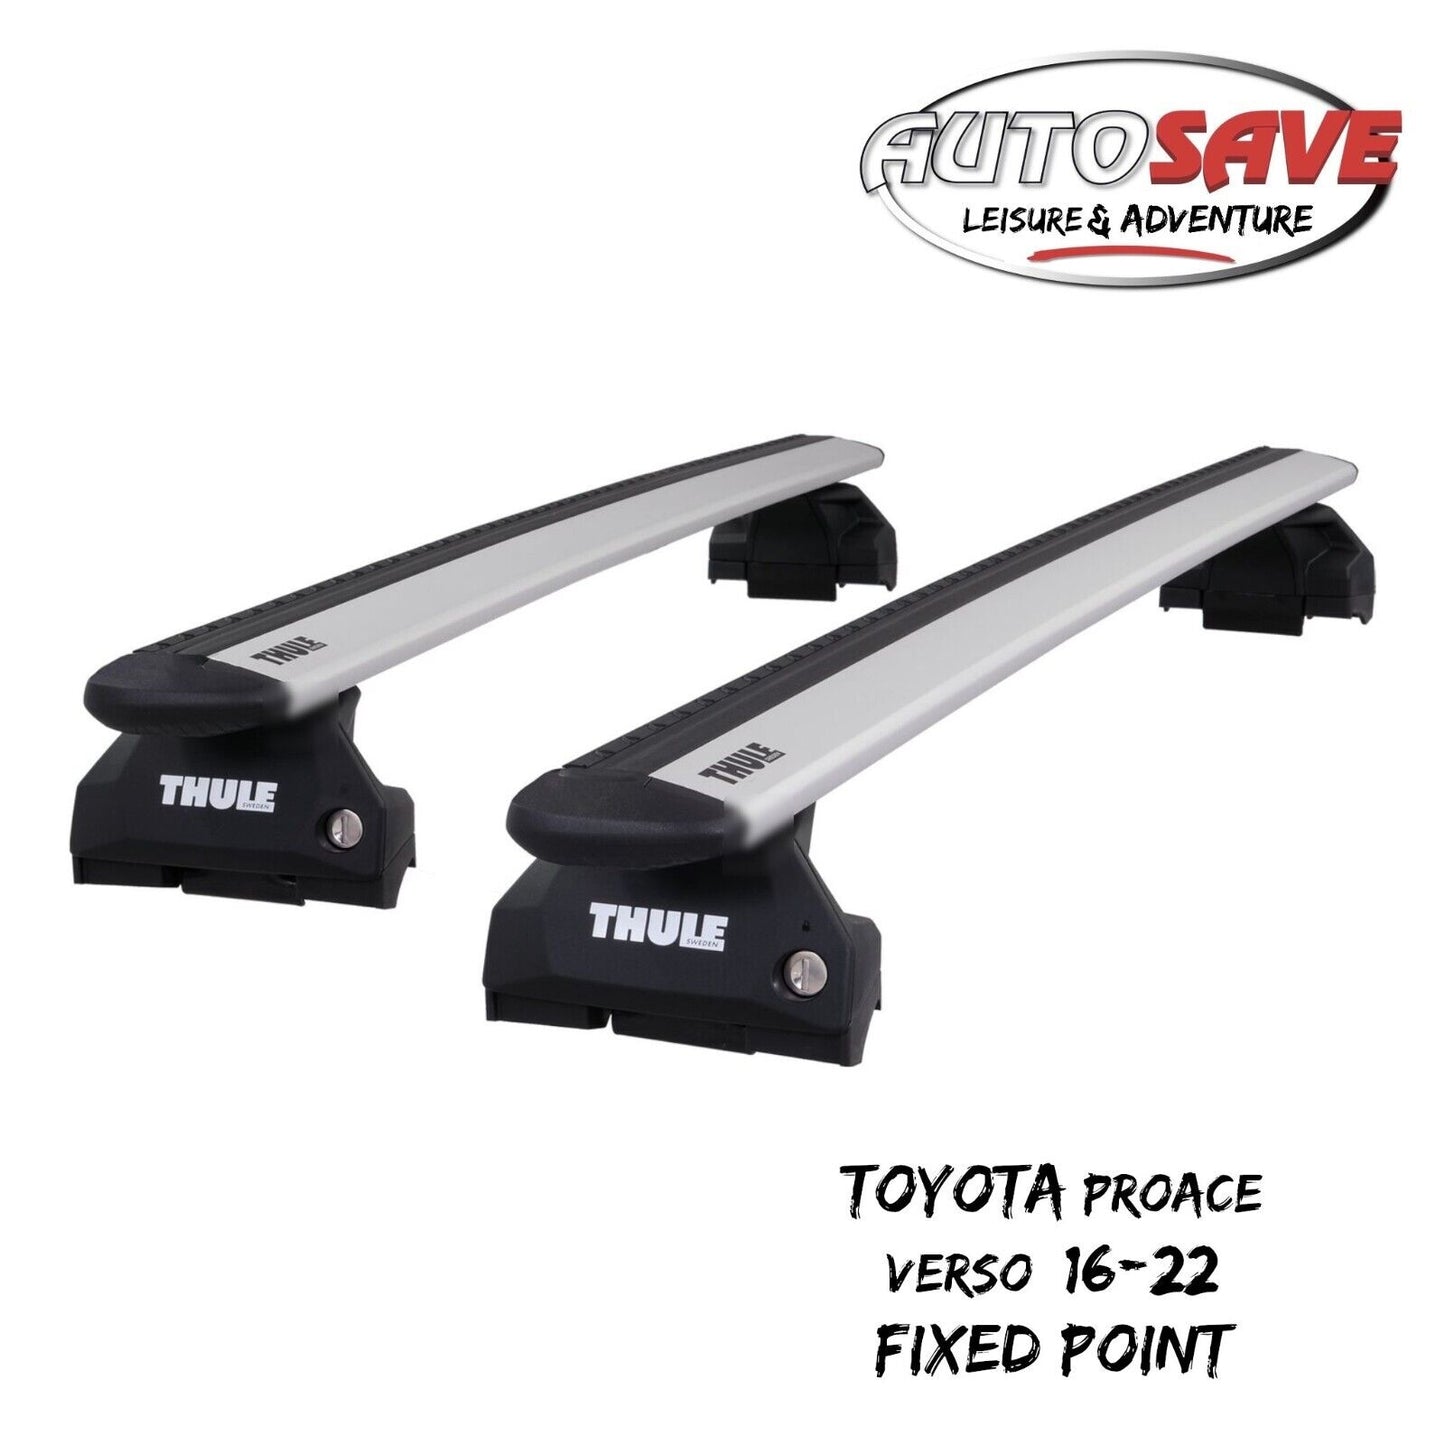 Thule WingBar Evo Silver Roof Bars Set for Toyota Proace Verso 16-22 Fixpoints